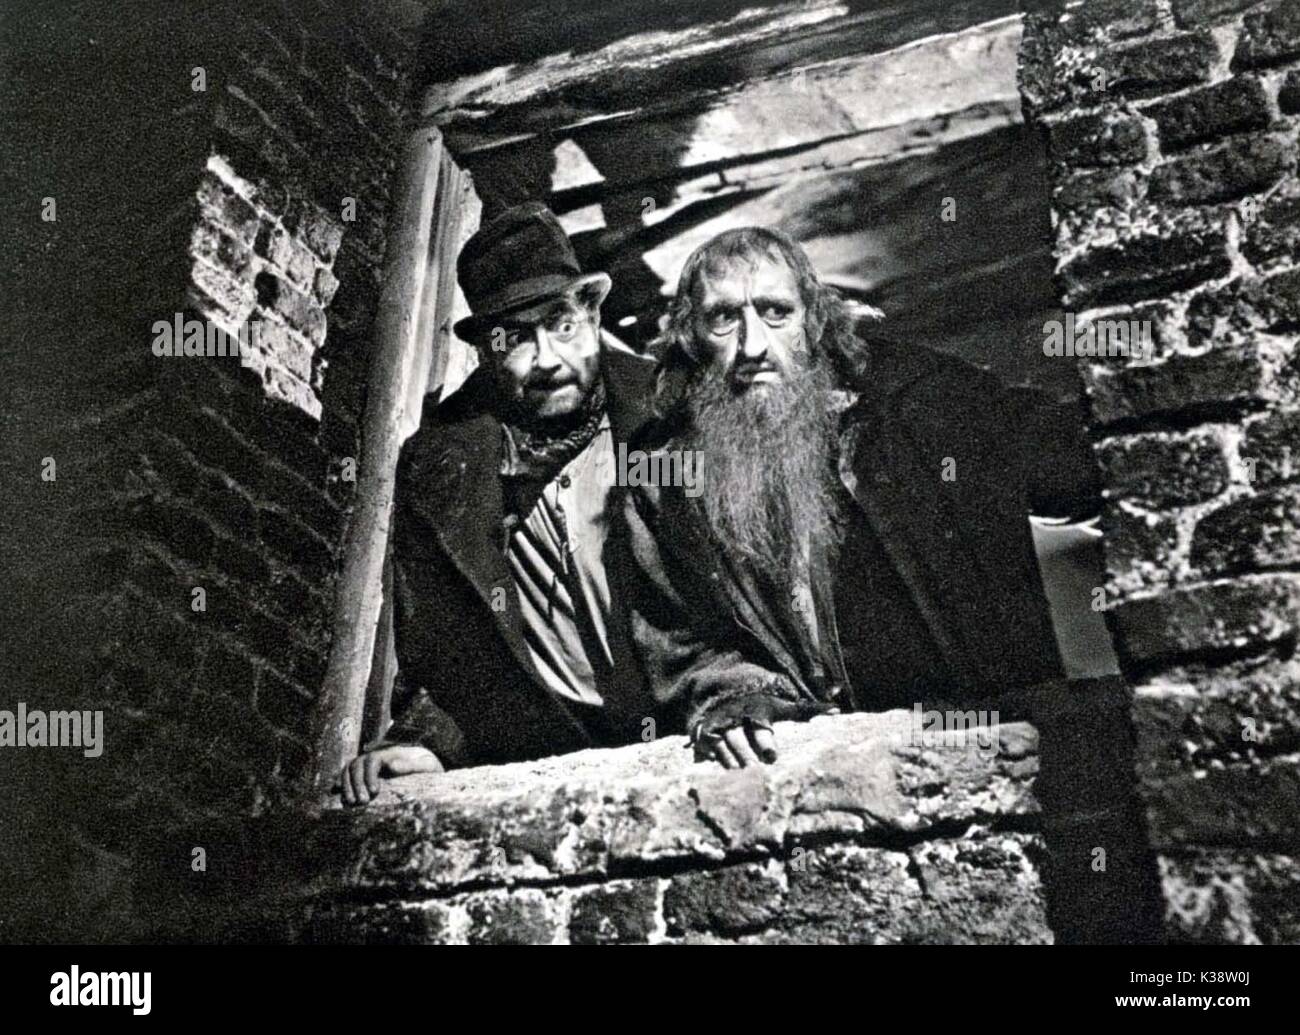 OLIVER TWIST ROBERT NEWTON as Bill Sikes, ALEC GUINNESS as Fagin     Date: 1948 Stock Photo